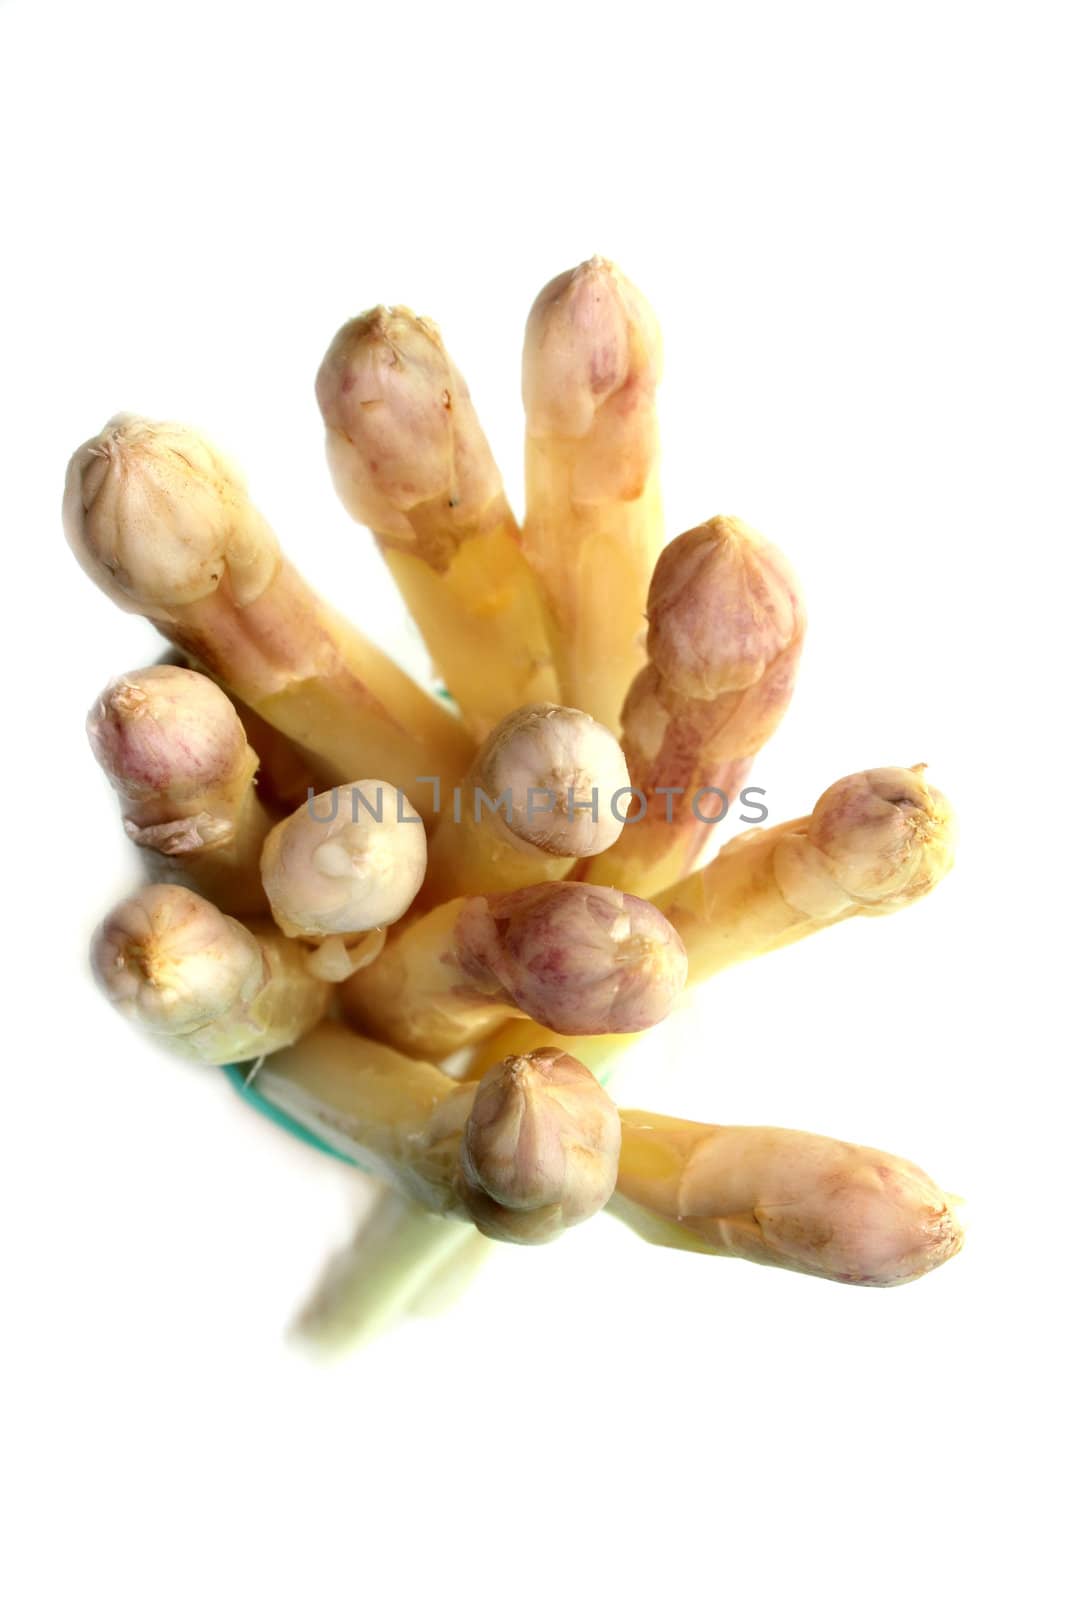 a bundle of fresh asparagus on a white background